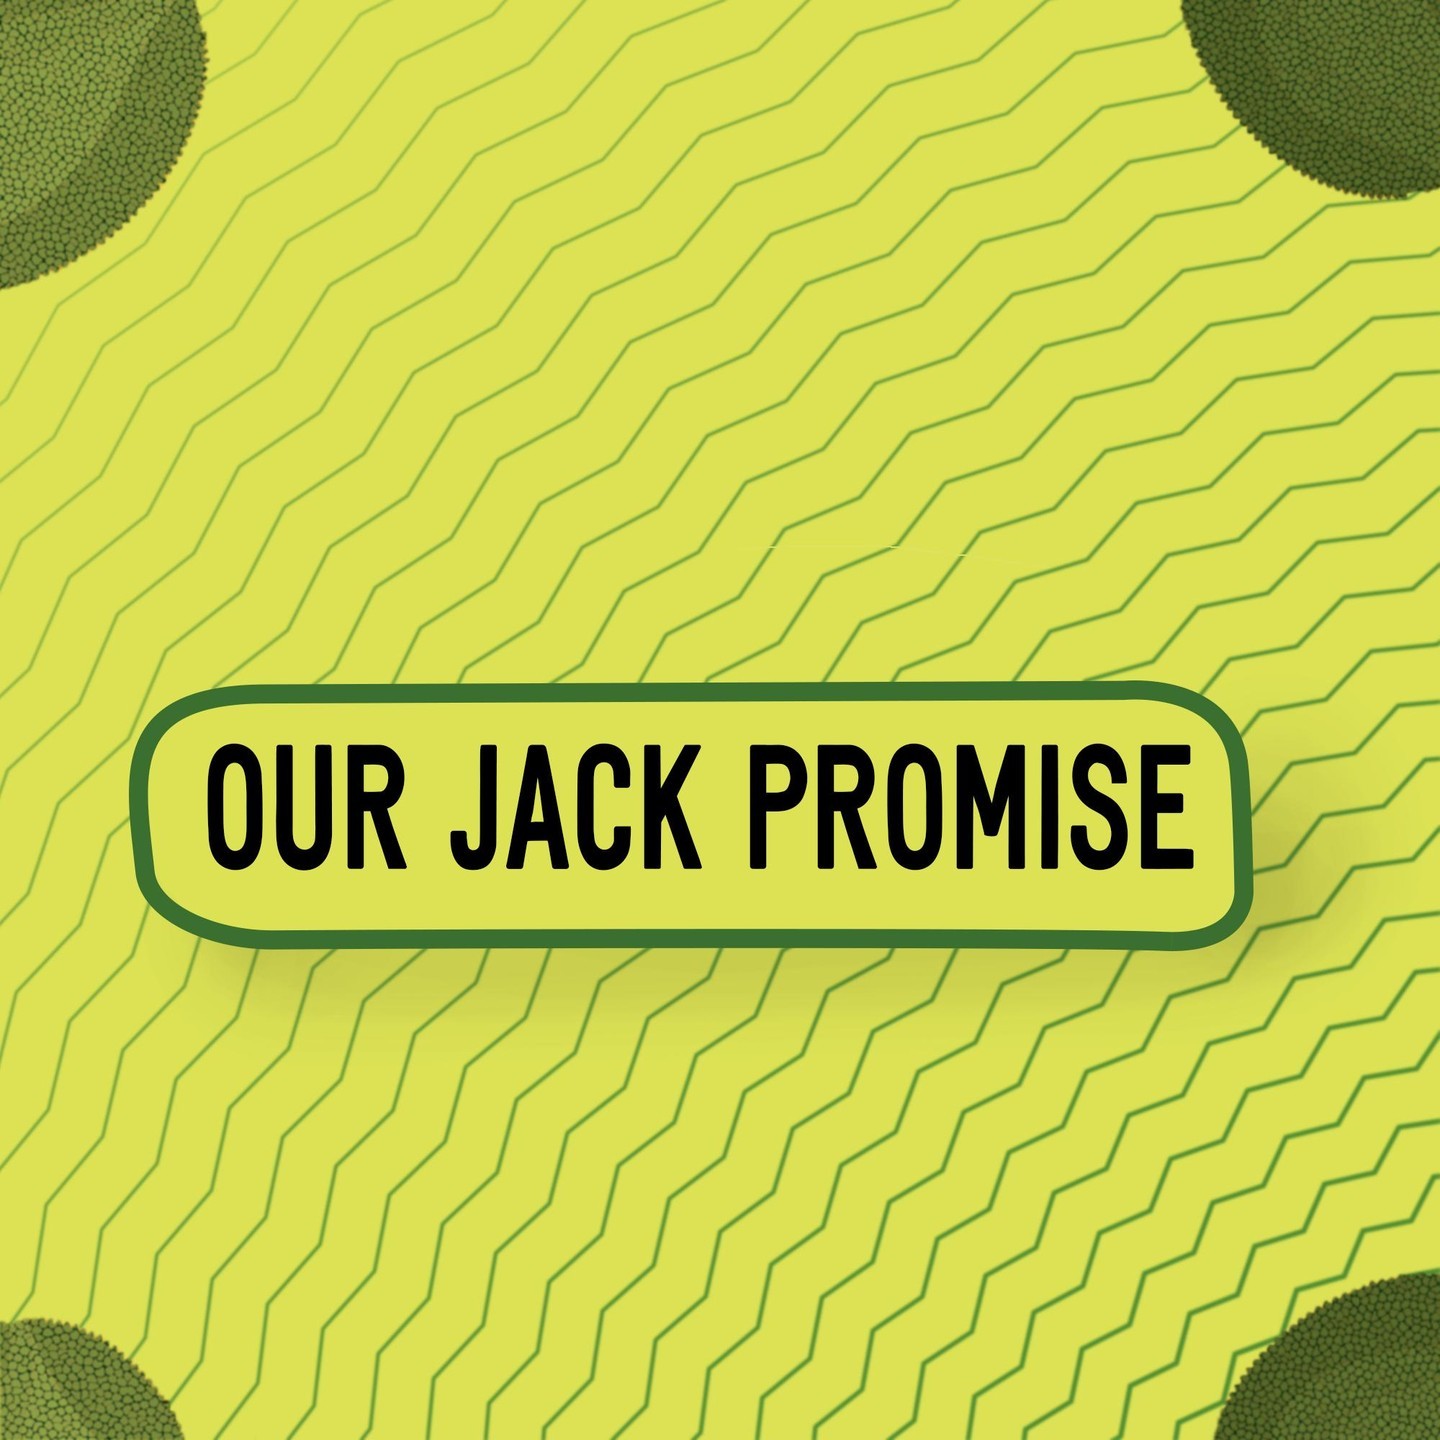 Jack and chill Jack promise